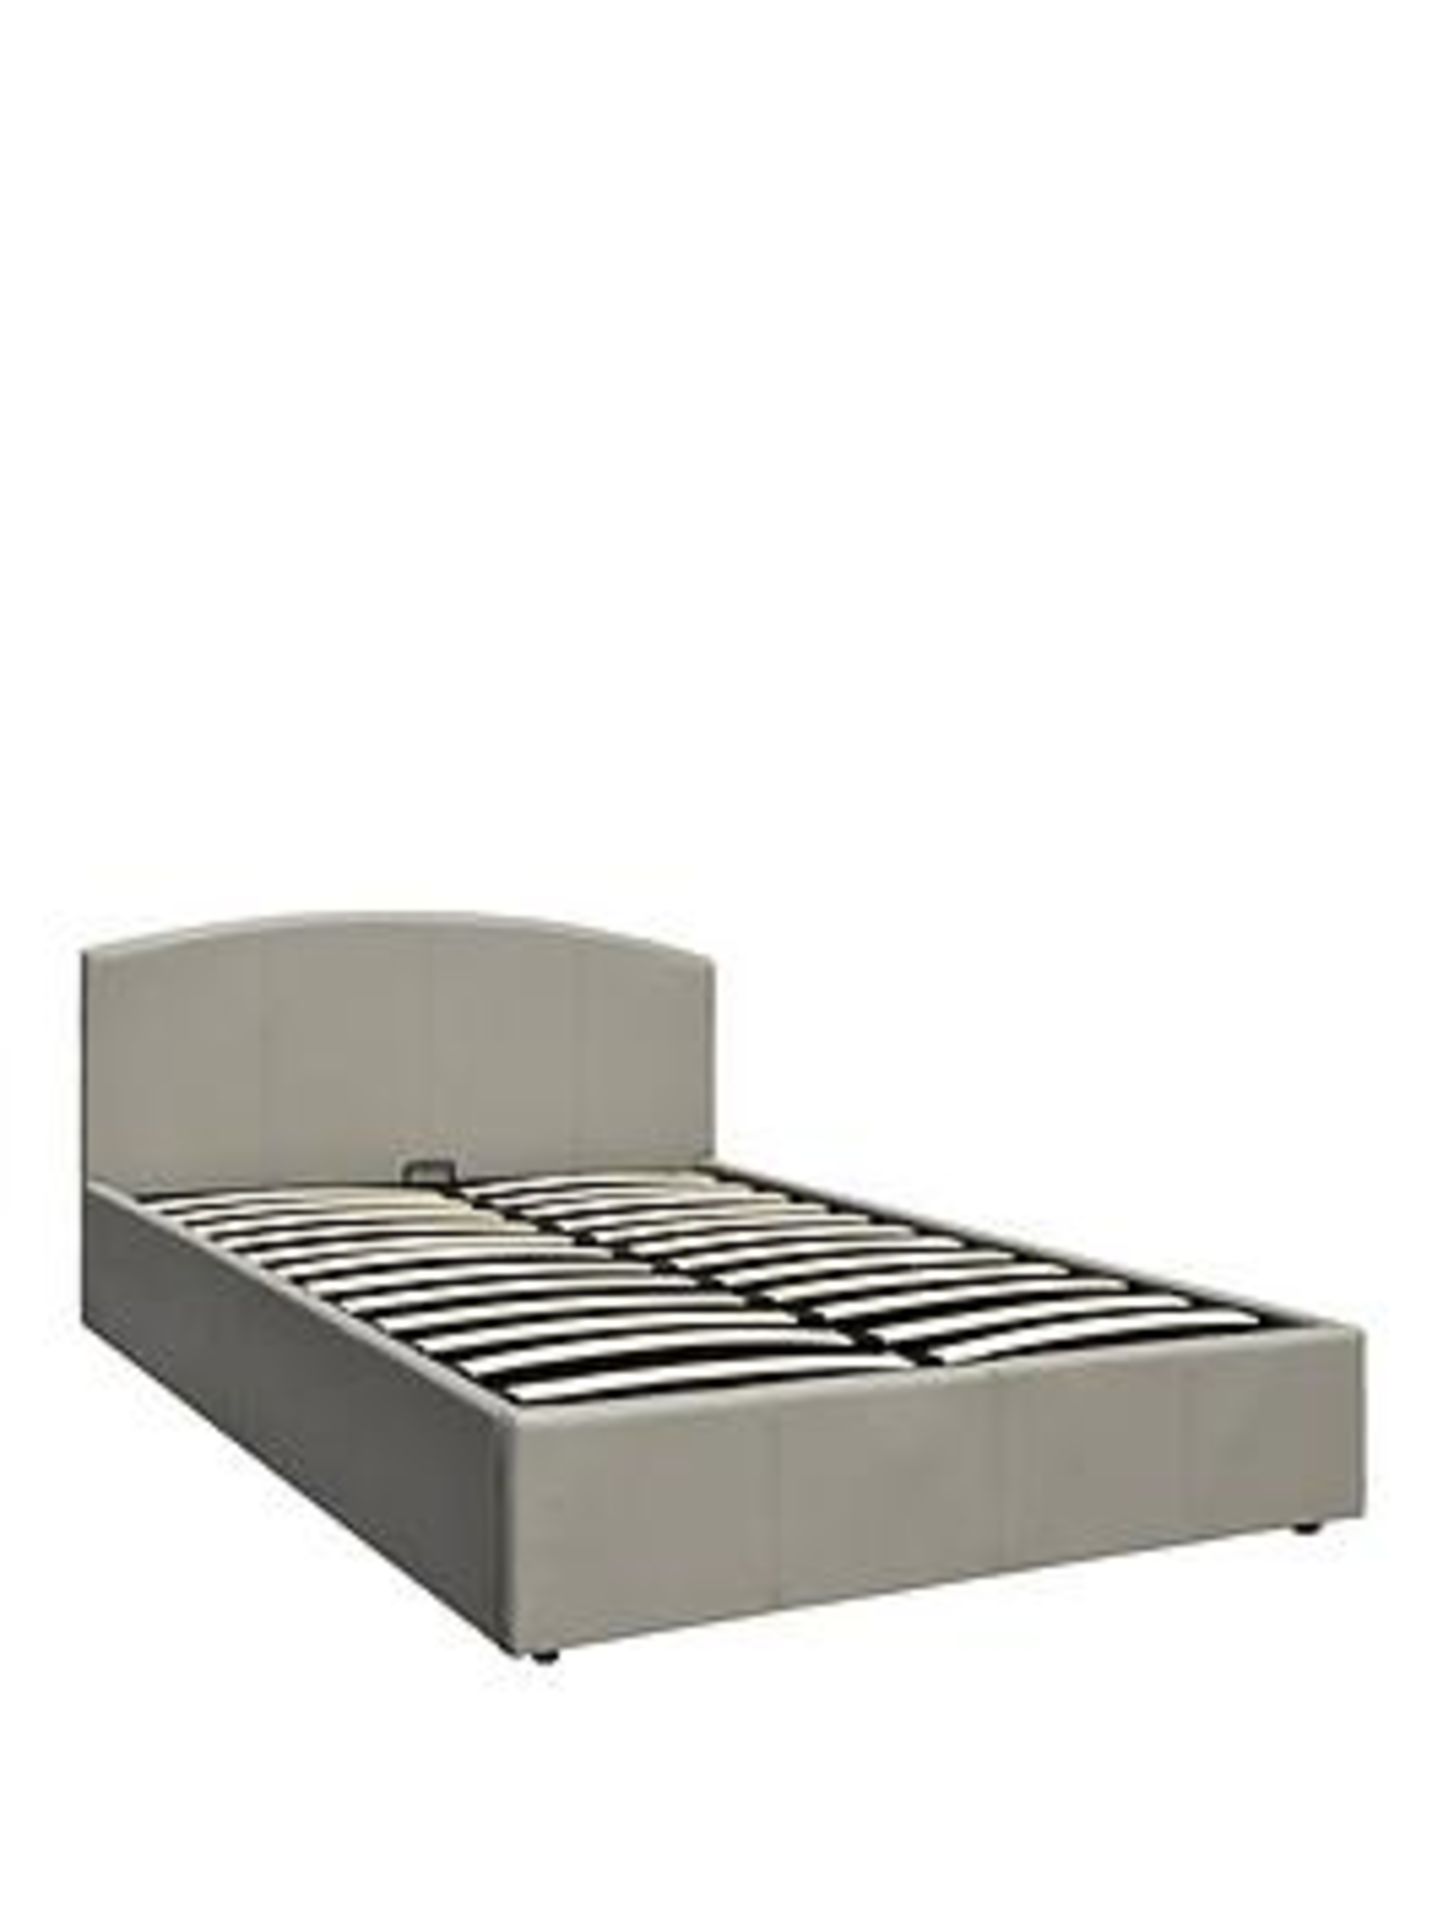 Boxed Item Marston King Lift-Up Bed [Grey] 88X159X212Cm Rrp:£550.0 - Image 2 of 2